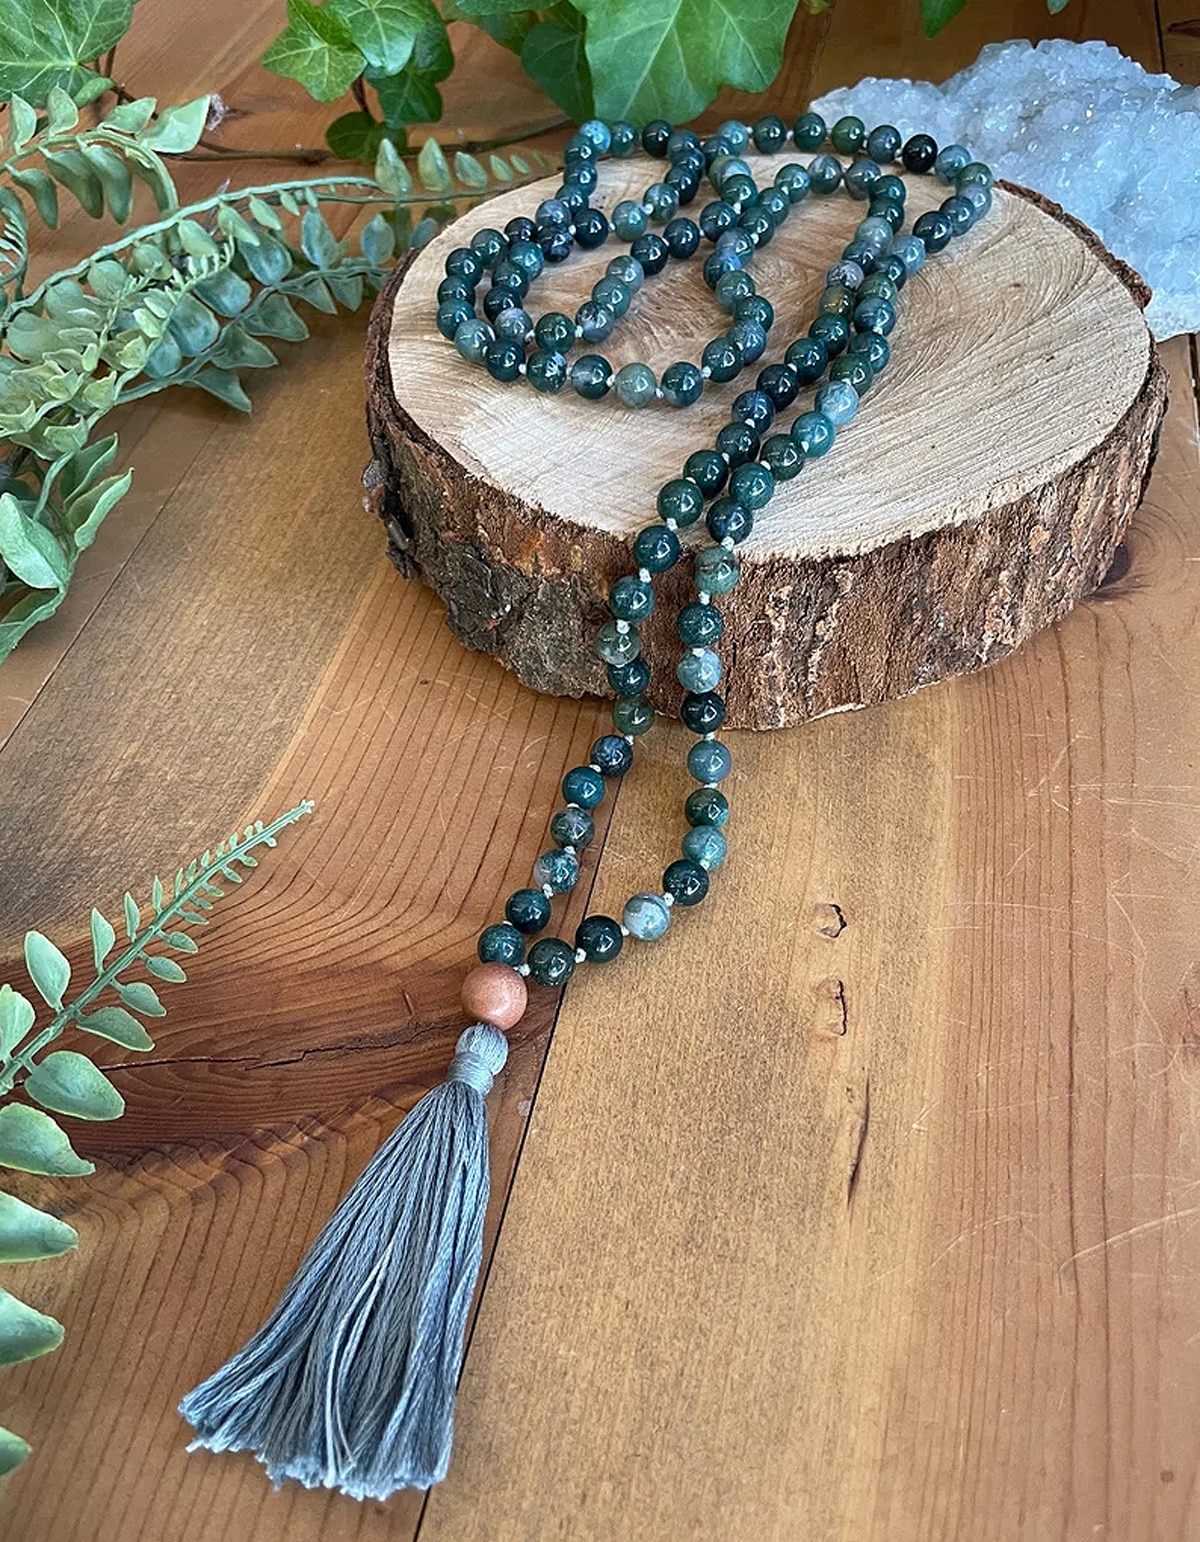 mala necklace kit on piece of wood placed on table